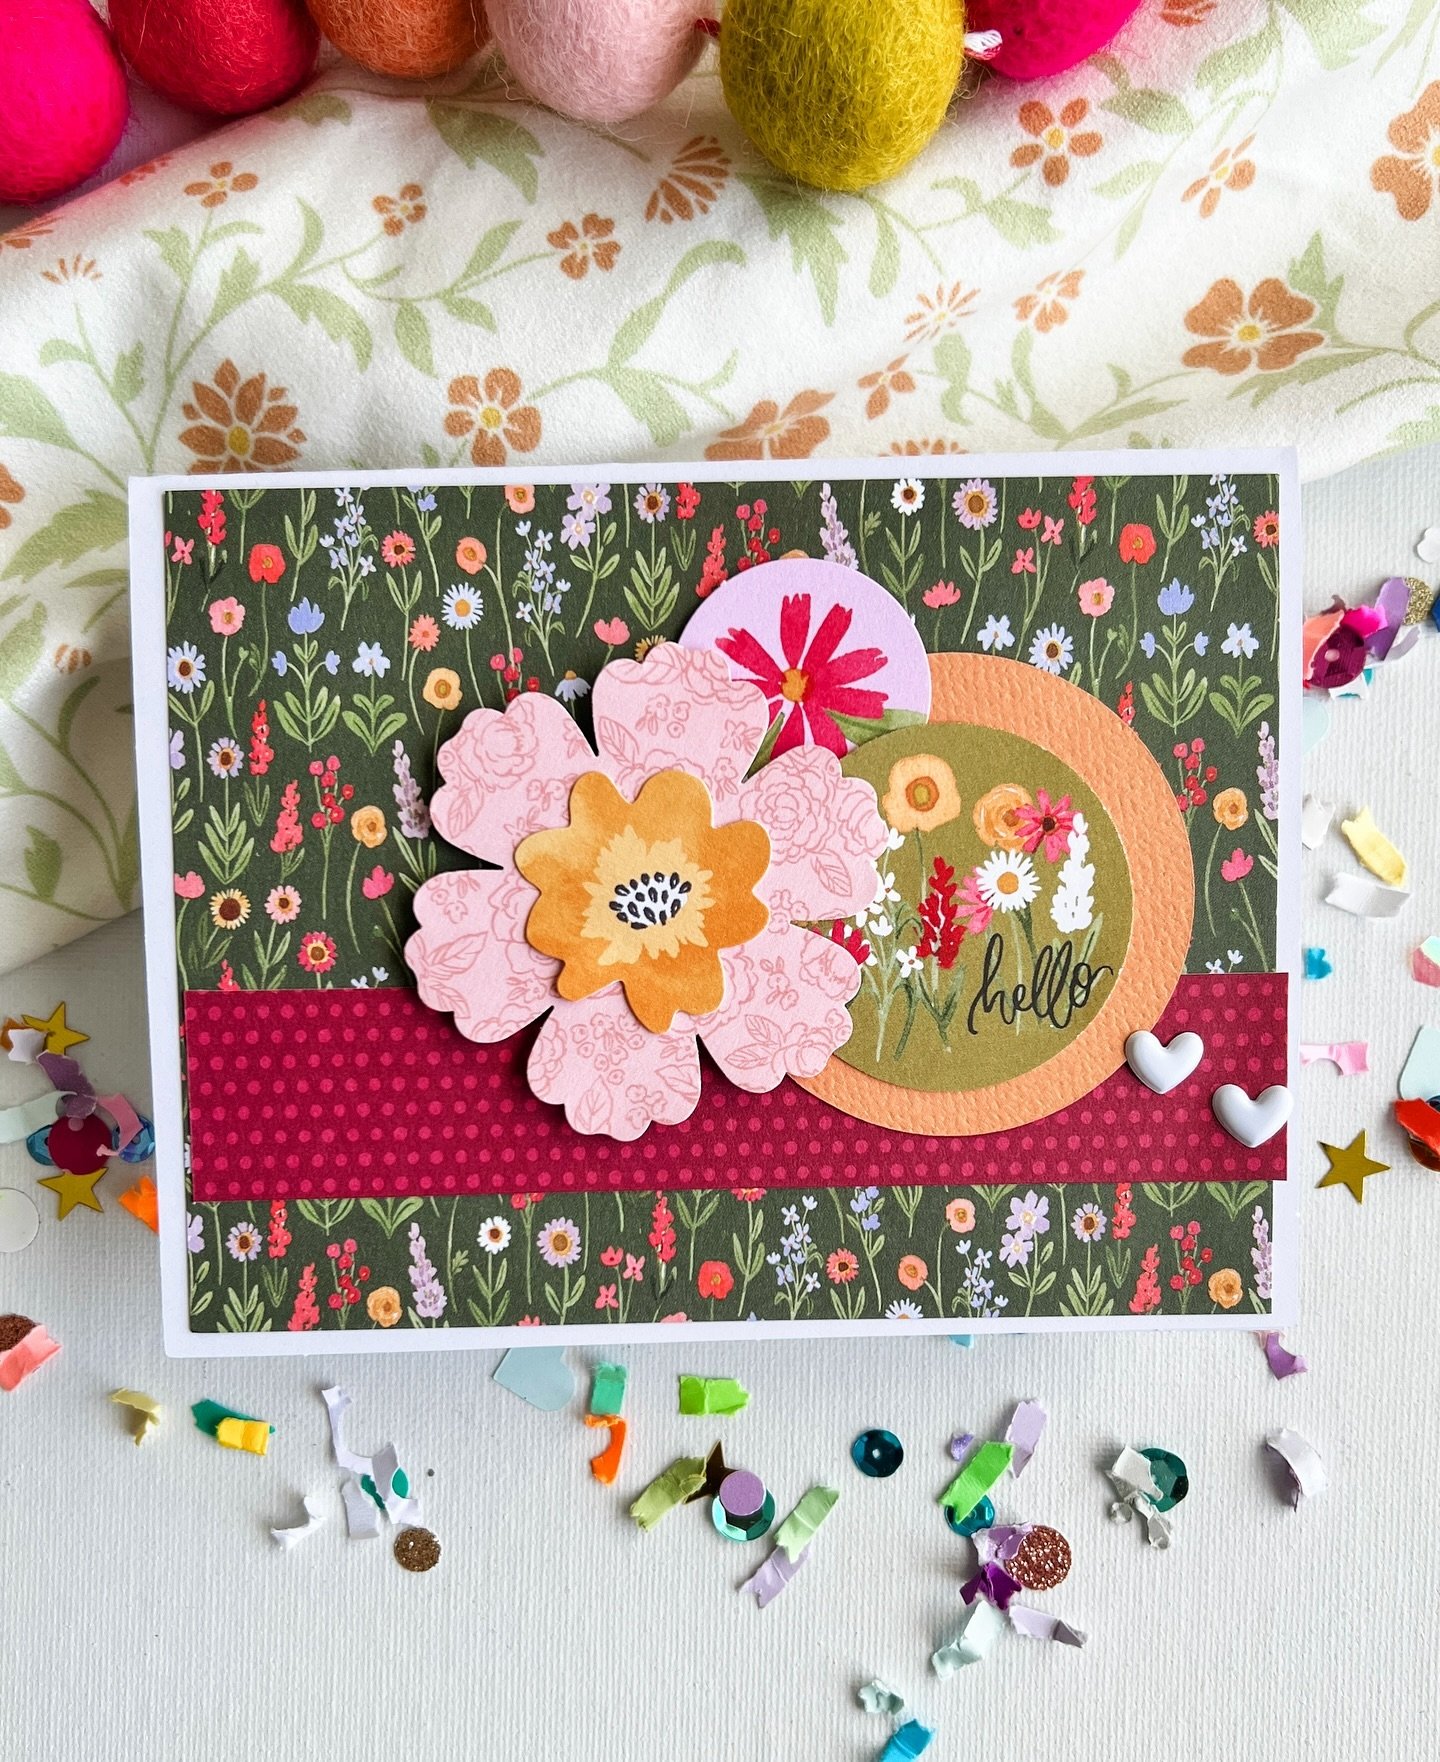 Finding time to craft can be tough, but it&rsquo;s worth it! Recently, I used a flower card kit from Lindsay&rsquo;s Layouts. Crafting is my escape from the daily grind. Make time for what brings you joy! 

For more flower power ideas, visit:

@the.l